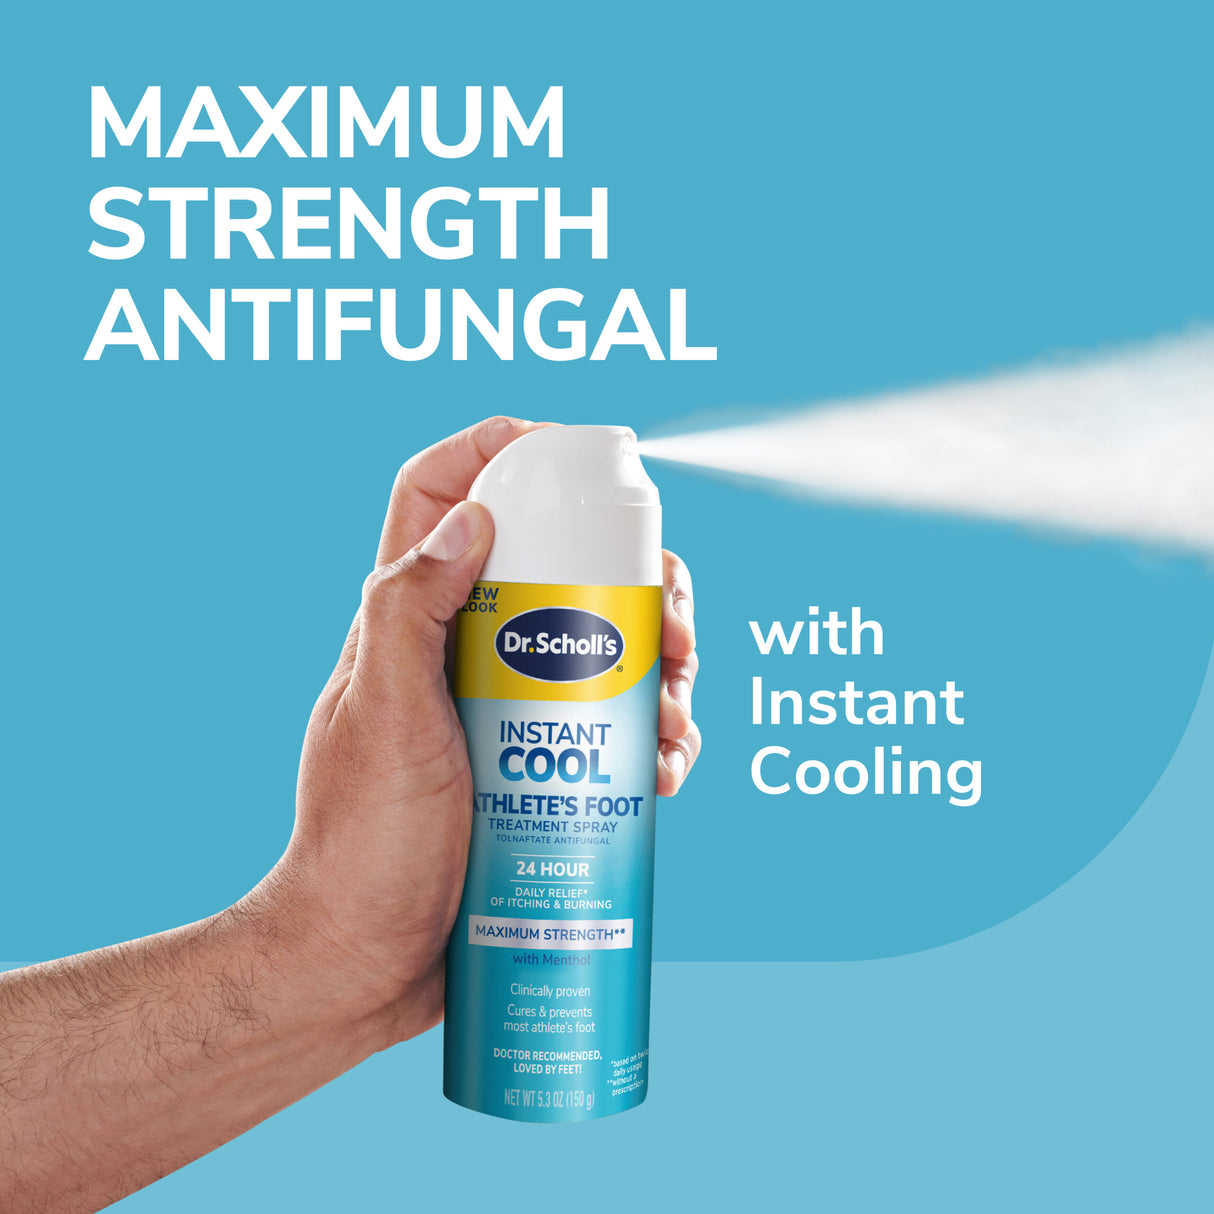 image of maximum strength antifungal with instant cooling